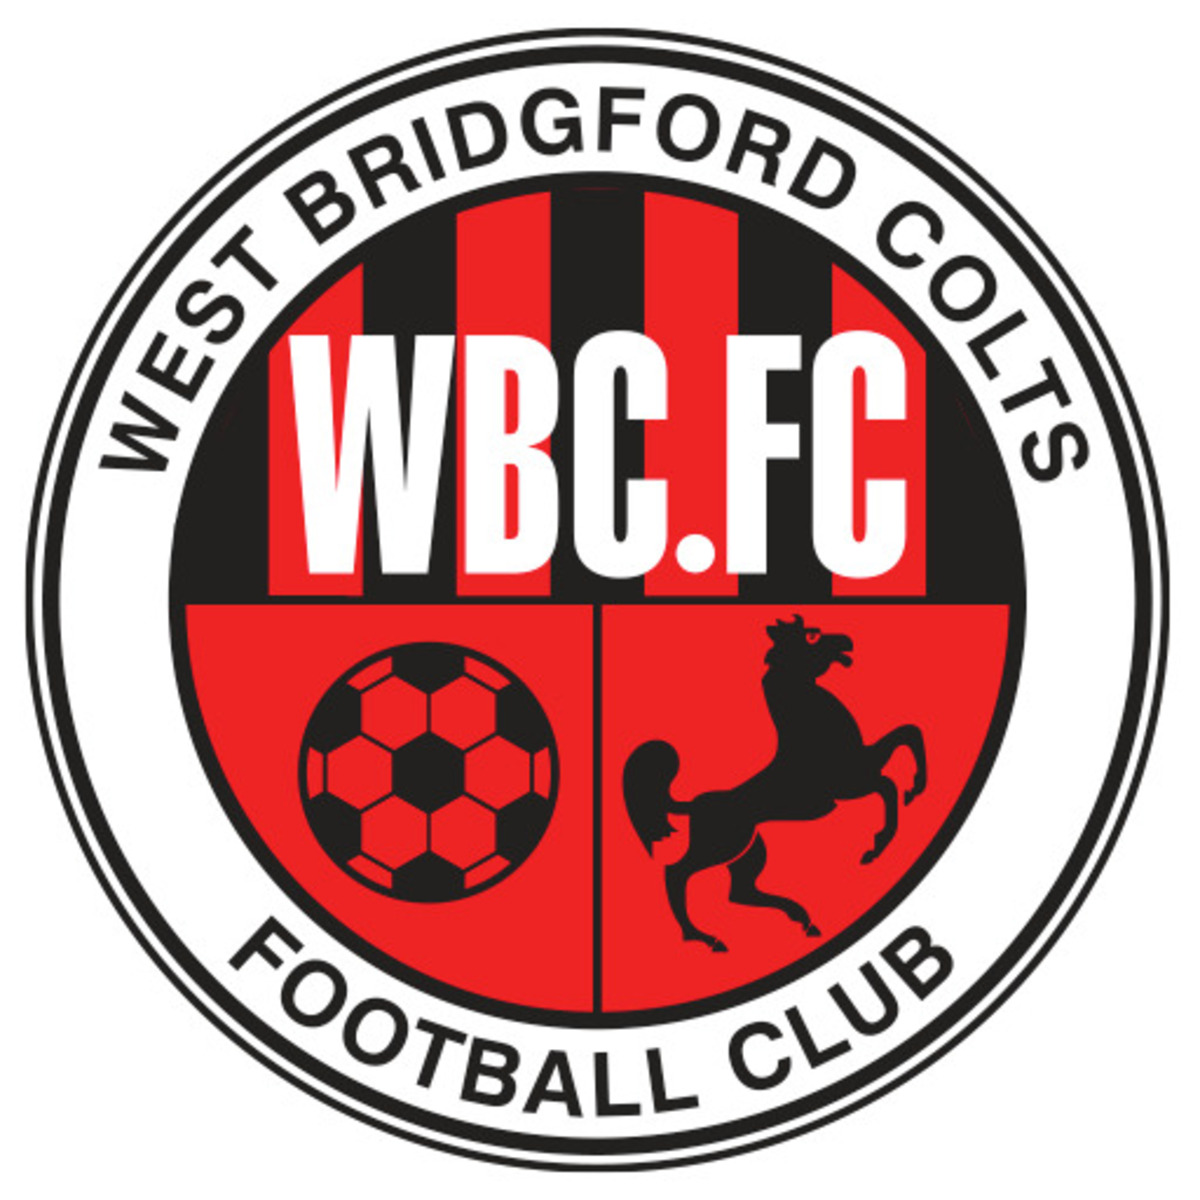 A Logo of Local Football Club Who Based in the Capital of West